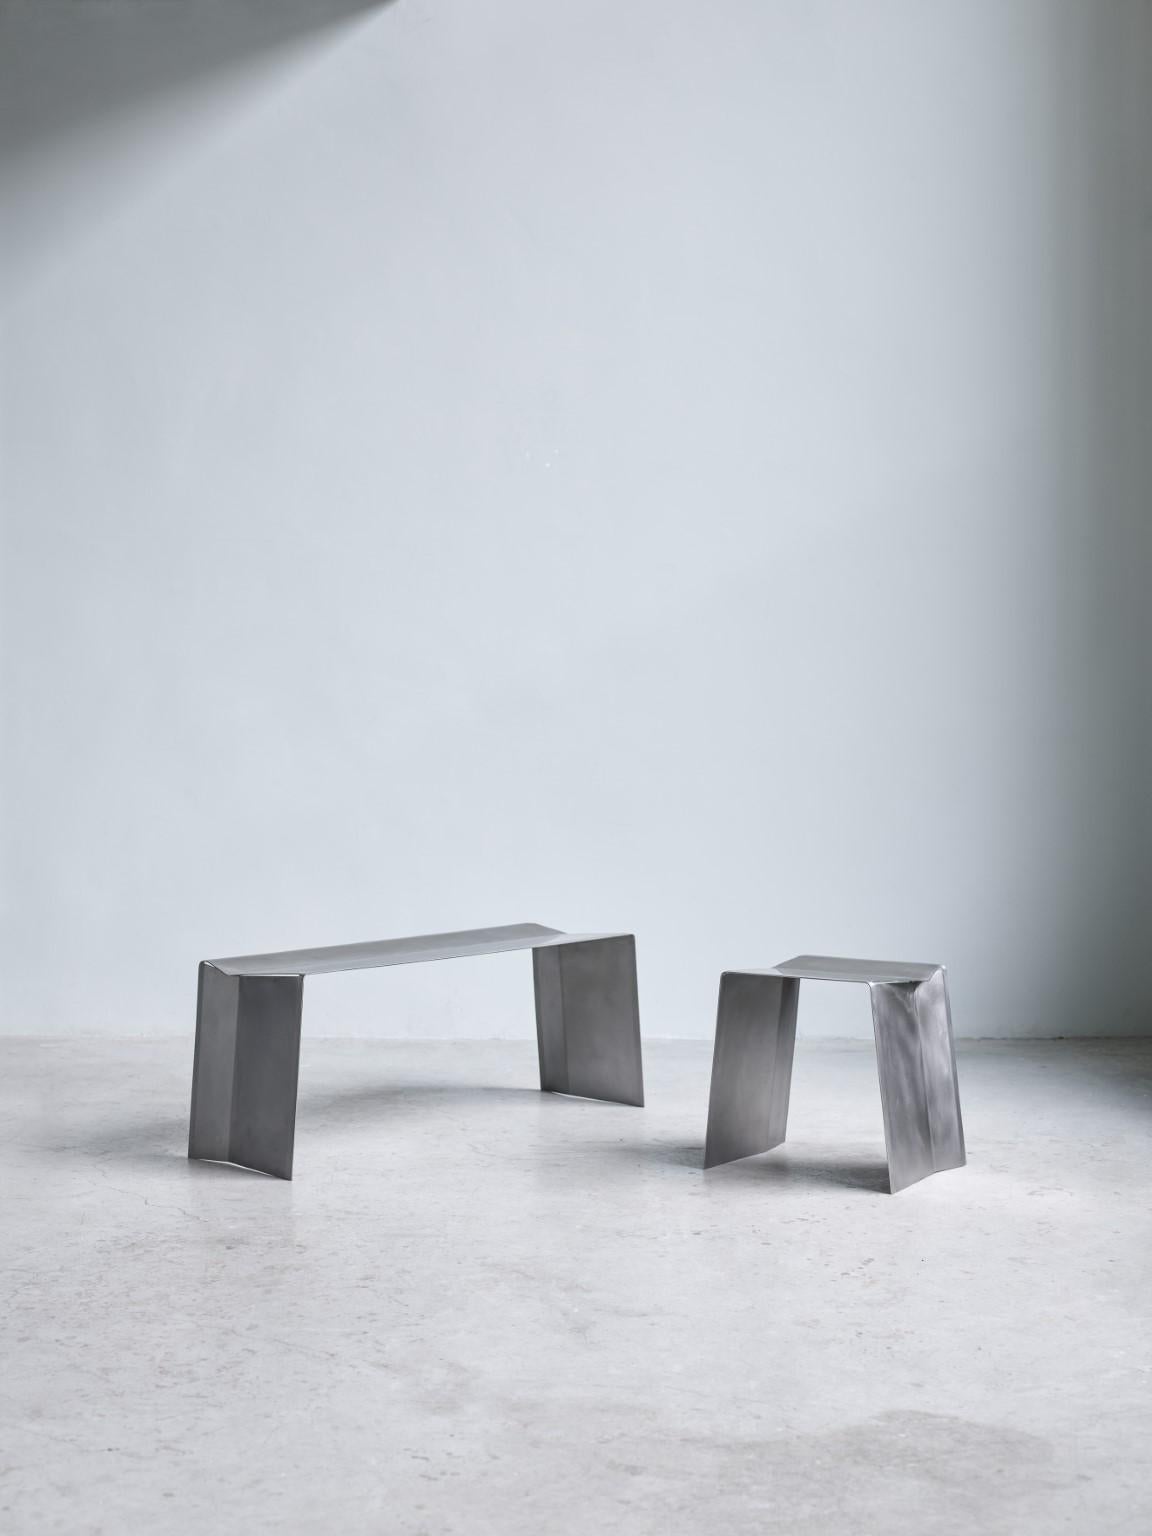 Set of camber stool and bench by Paul Coenen.
Dimensions: 
Stool: W 47 x D 37 x H 45 cm
Bench: W 118 x D 37 x H 45 cm
Materials: Stainless steel.

The Camber bench and stool originated from the IDEA of manufacturing a piece of furniture from a